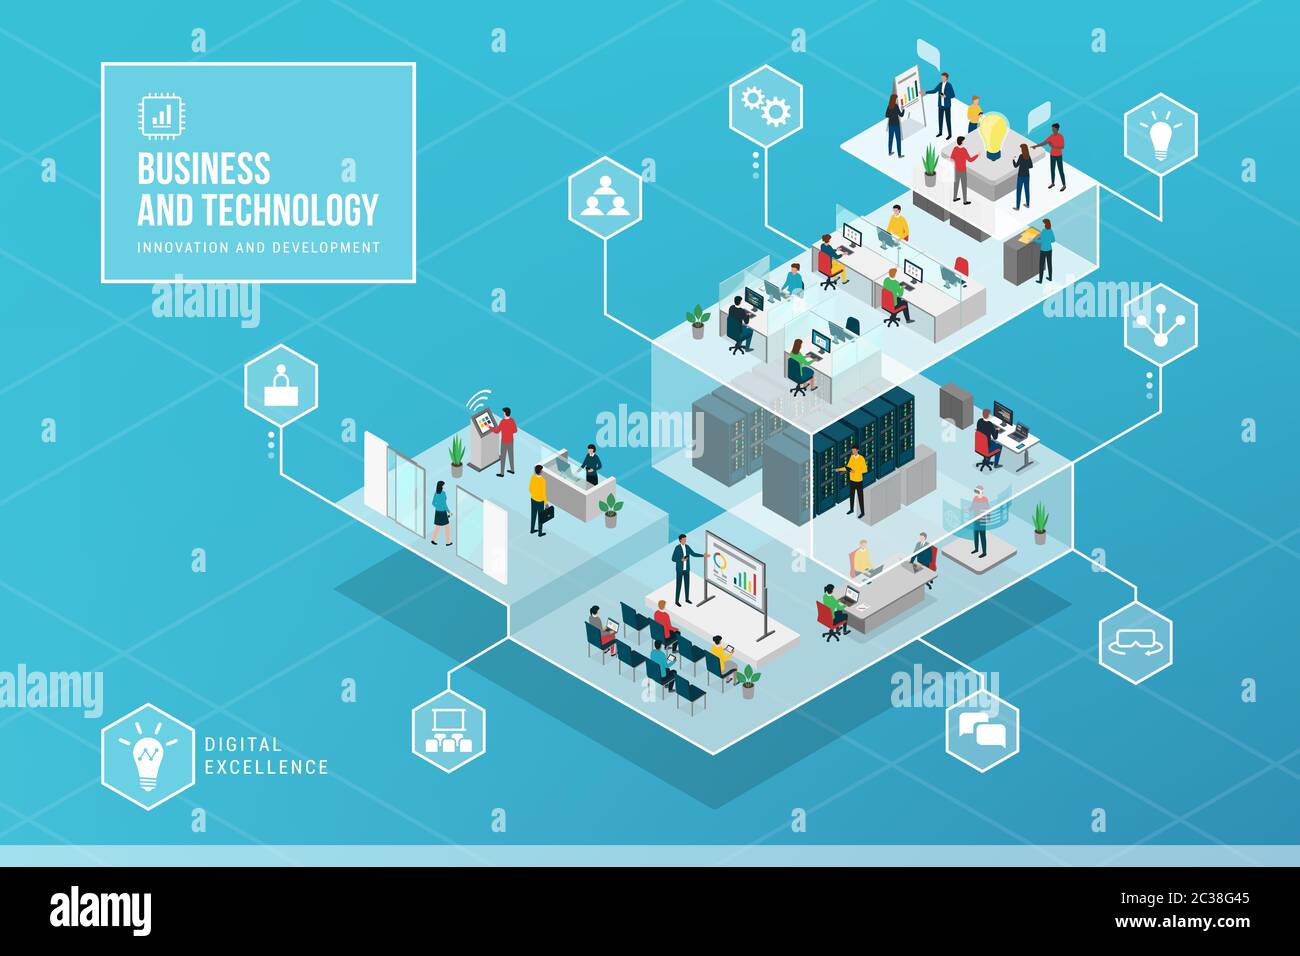 https://c8.alamy.com/comp/2C38G45/business-innovation-and-technology-isometric-infographic-technological-innovation-and-tasks-in-a-corporate-it-company-2C38G45.jpg